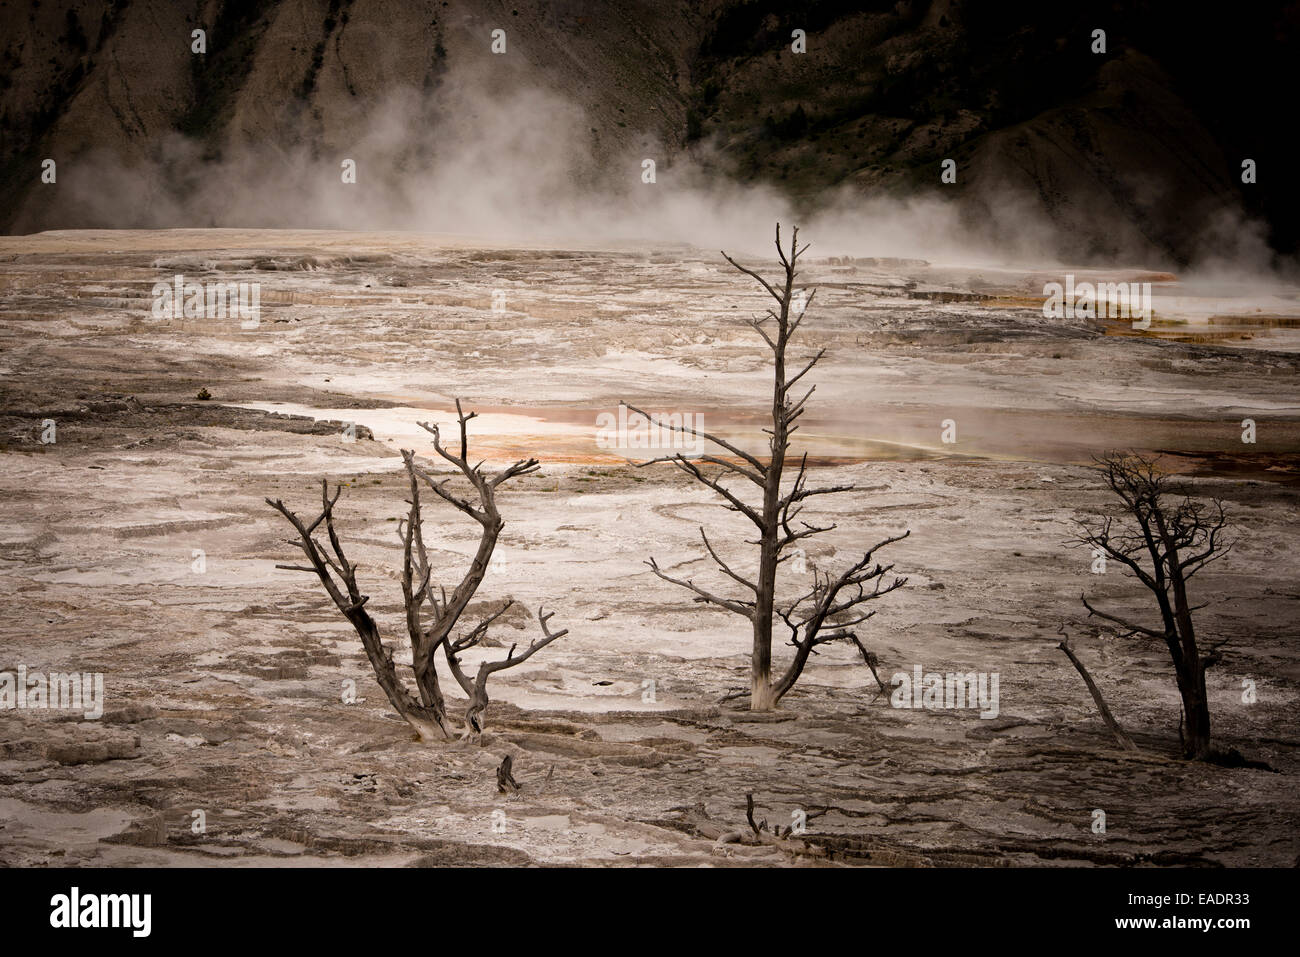 Remains of trees stand encased in the terraces of Mammoth Hot Springs, Yellowstone National Park. Stock Photo